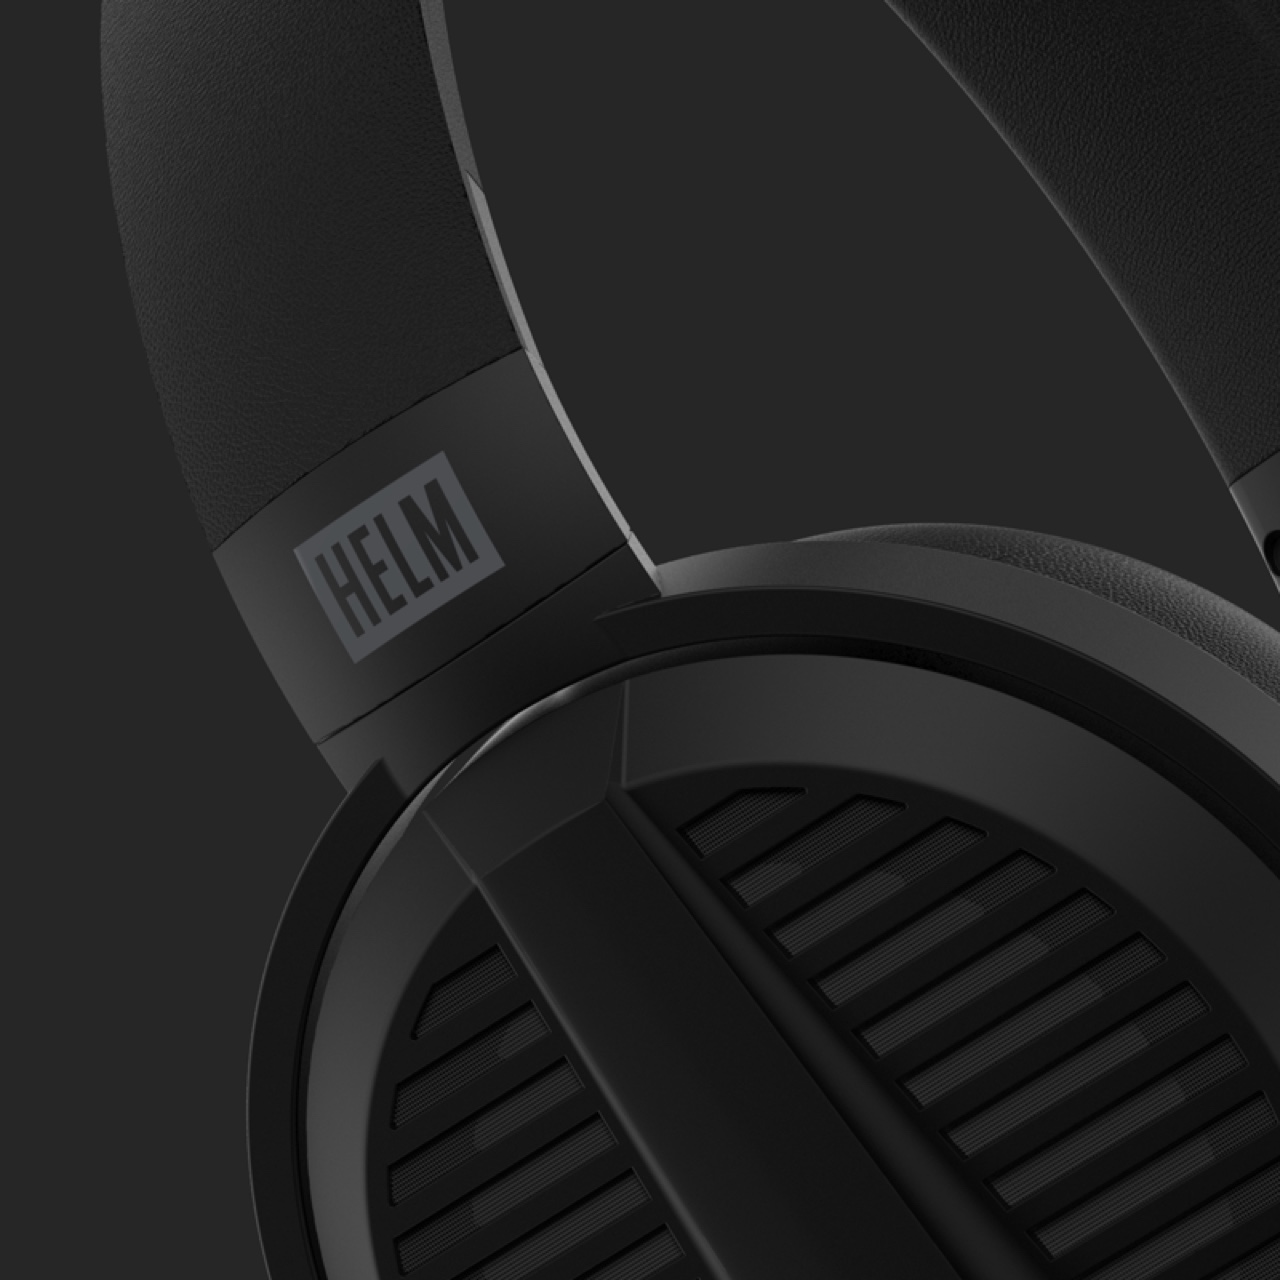 Side view of headphones with gray background